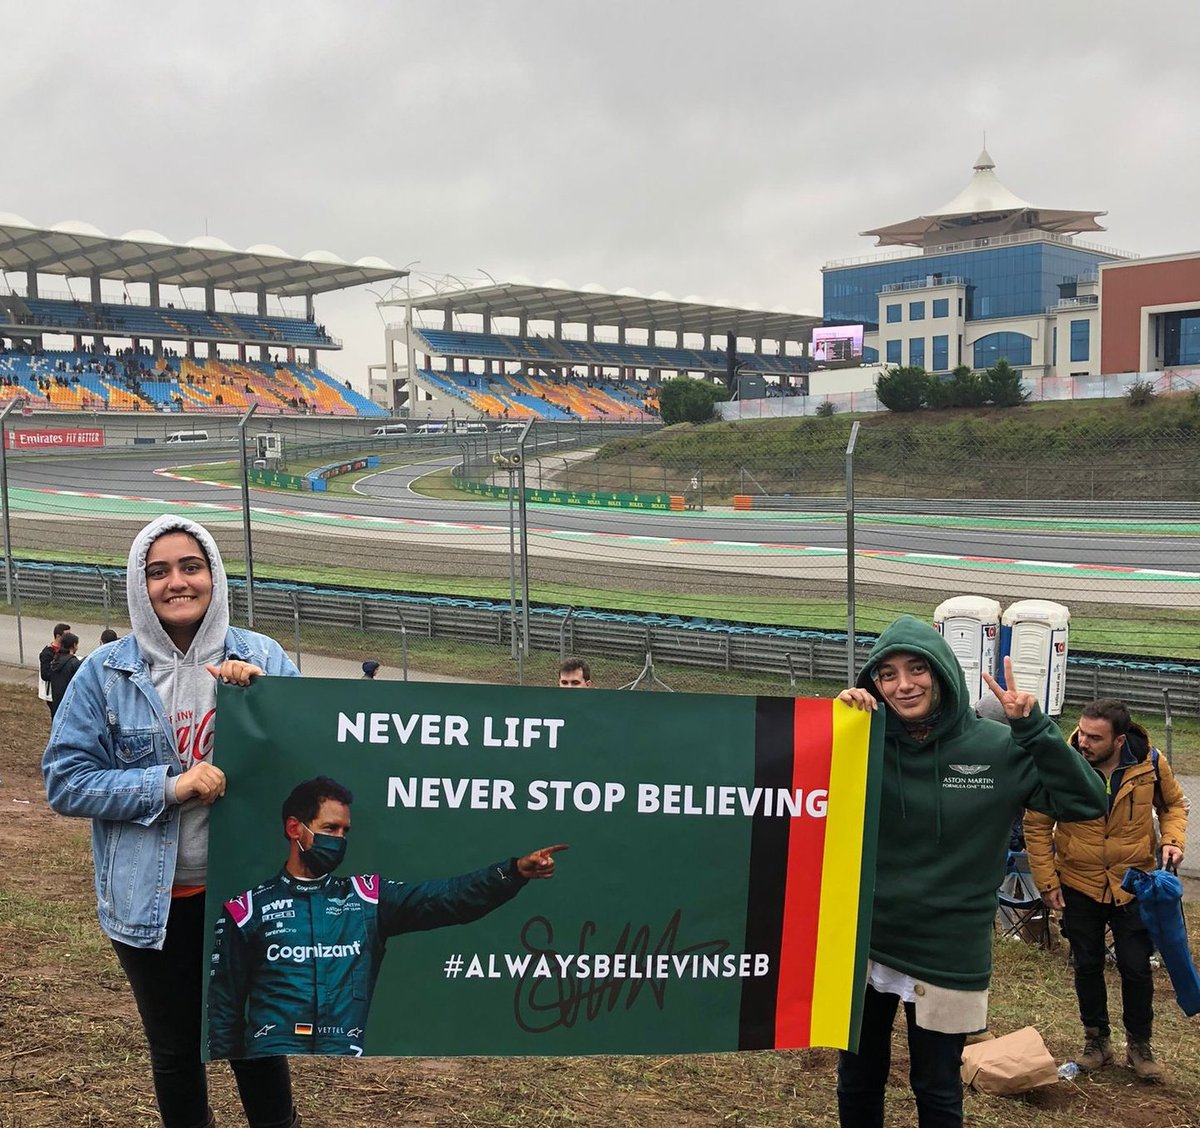 hey @AstonMartinF1 today wasn't the best for us but we always believe in Seb 💚💚 
#TurkishGP #IAMF1 #Vettel